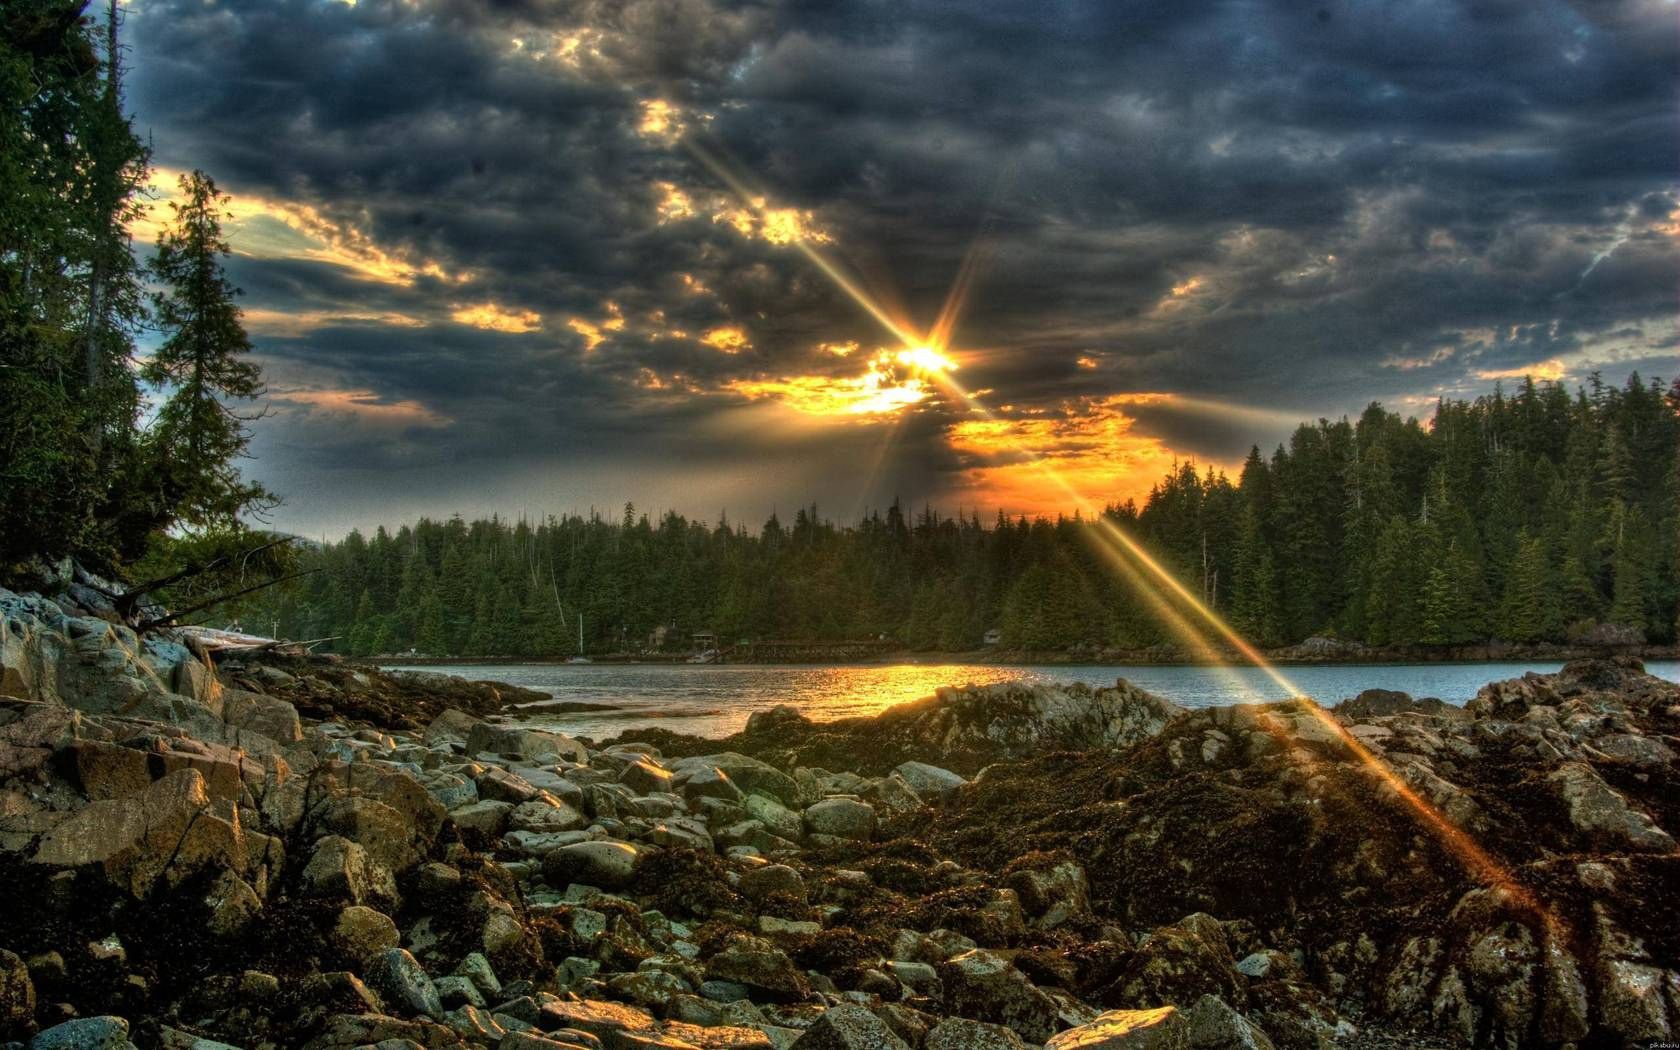 mainly cloudy, overcast, stones, nature, sun, clouds, lake, beams, rays, forest, evening